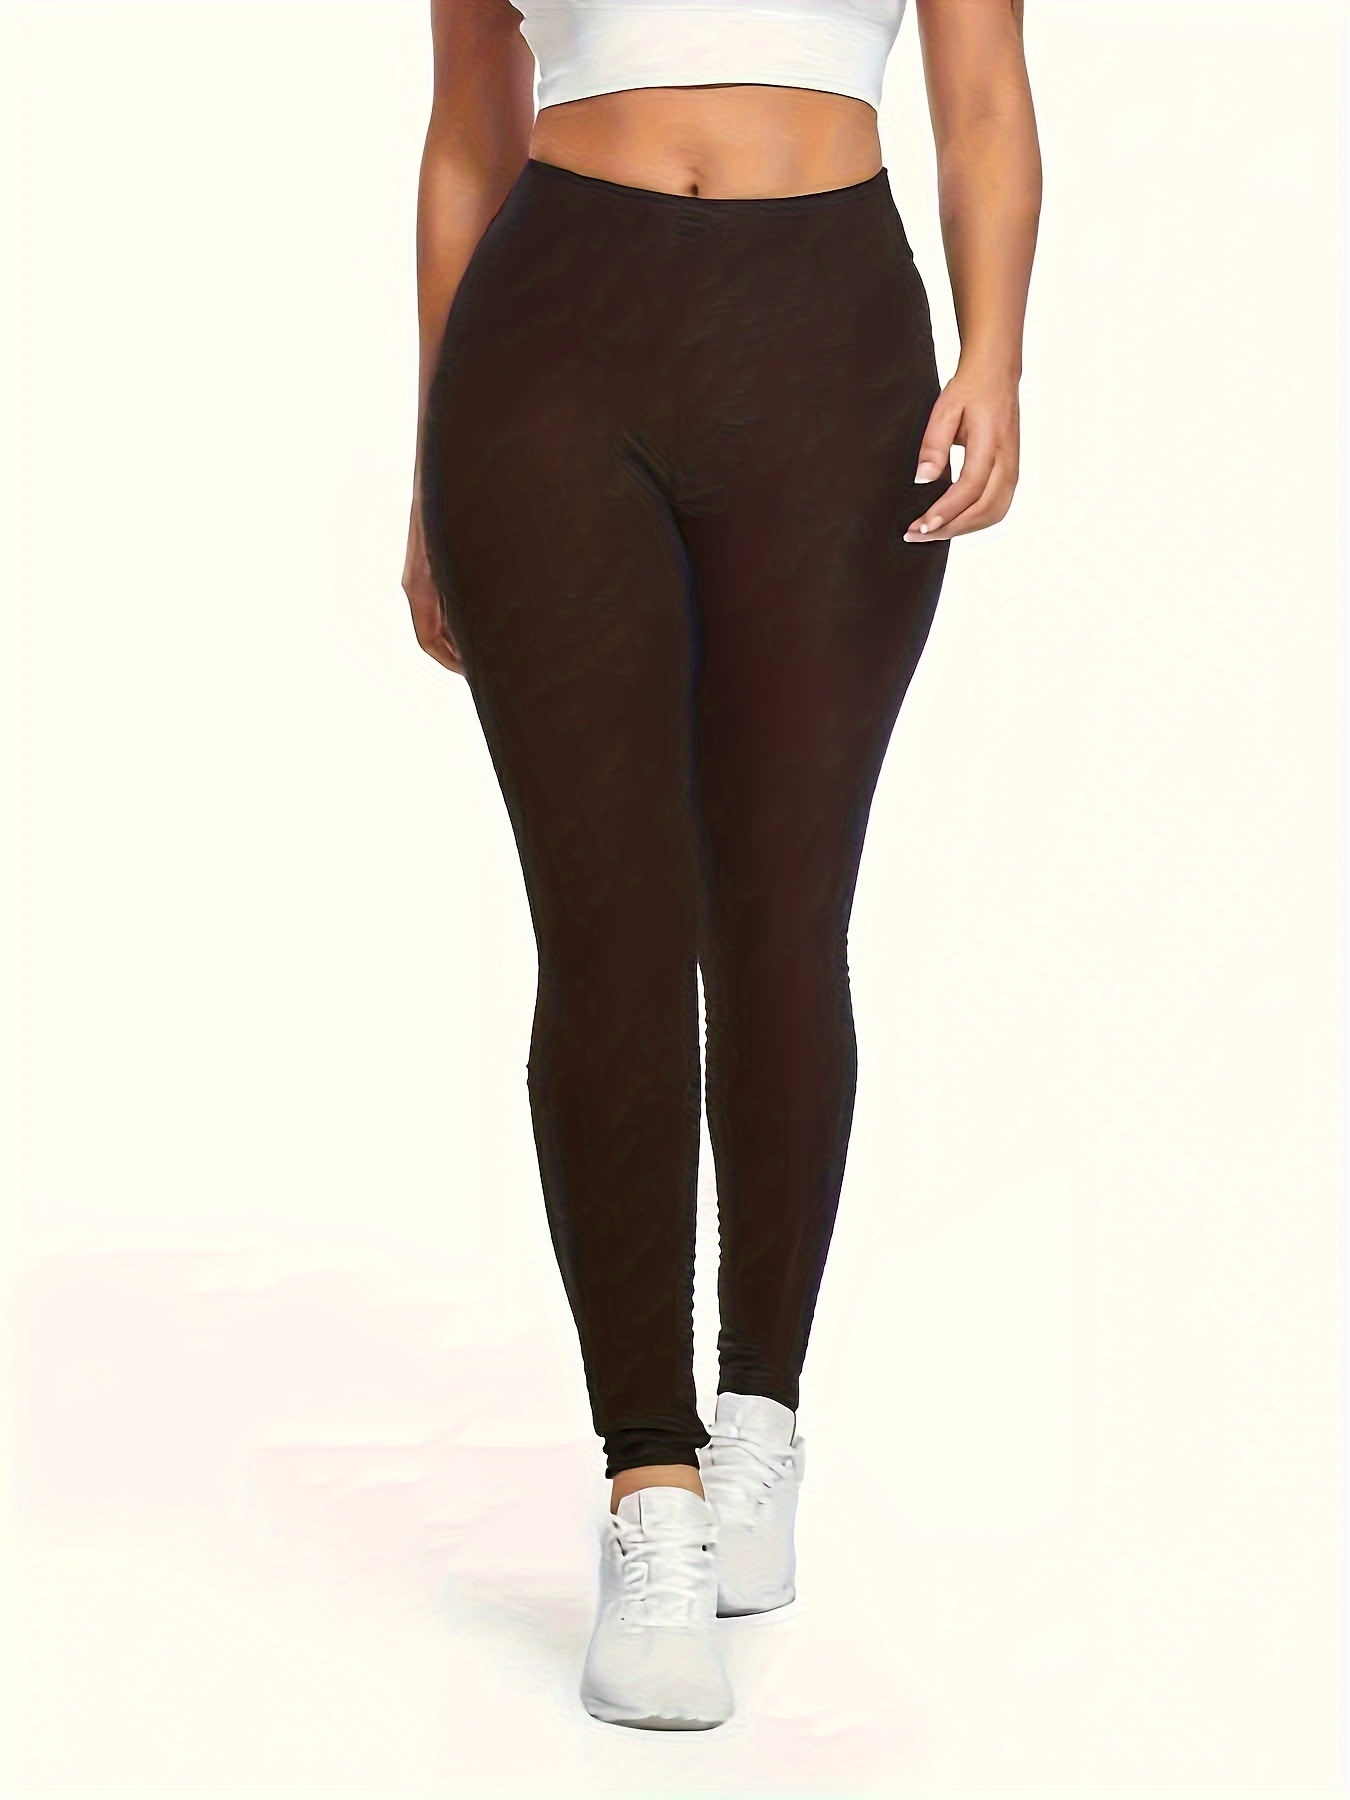 Chocolate Basic High Waist Gym Leggings  Gym leggings, Womens workout  outfits, Active wear